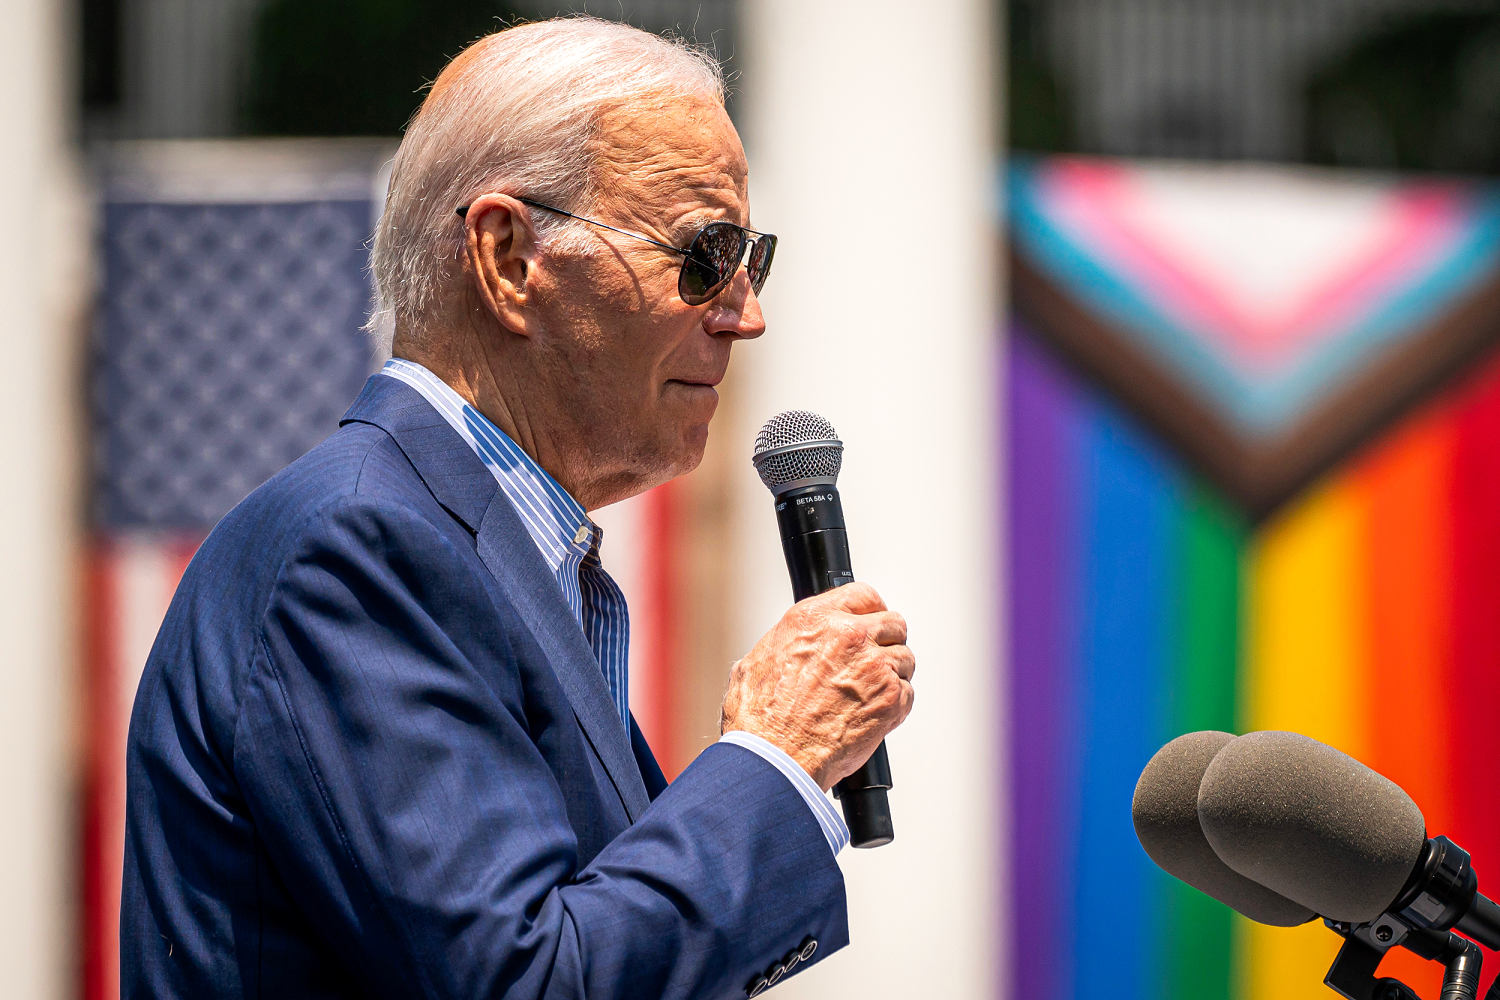 America’s largest LGBTQ rights group plans $15 million swing state blitz to re-elect Biden